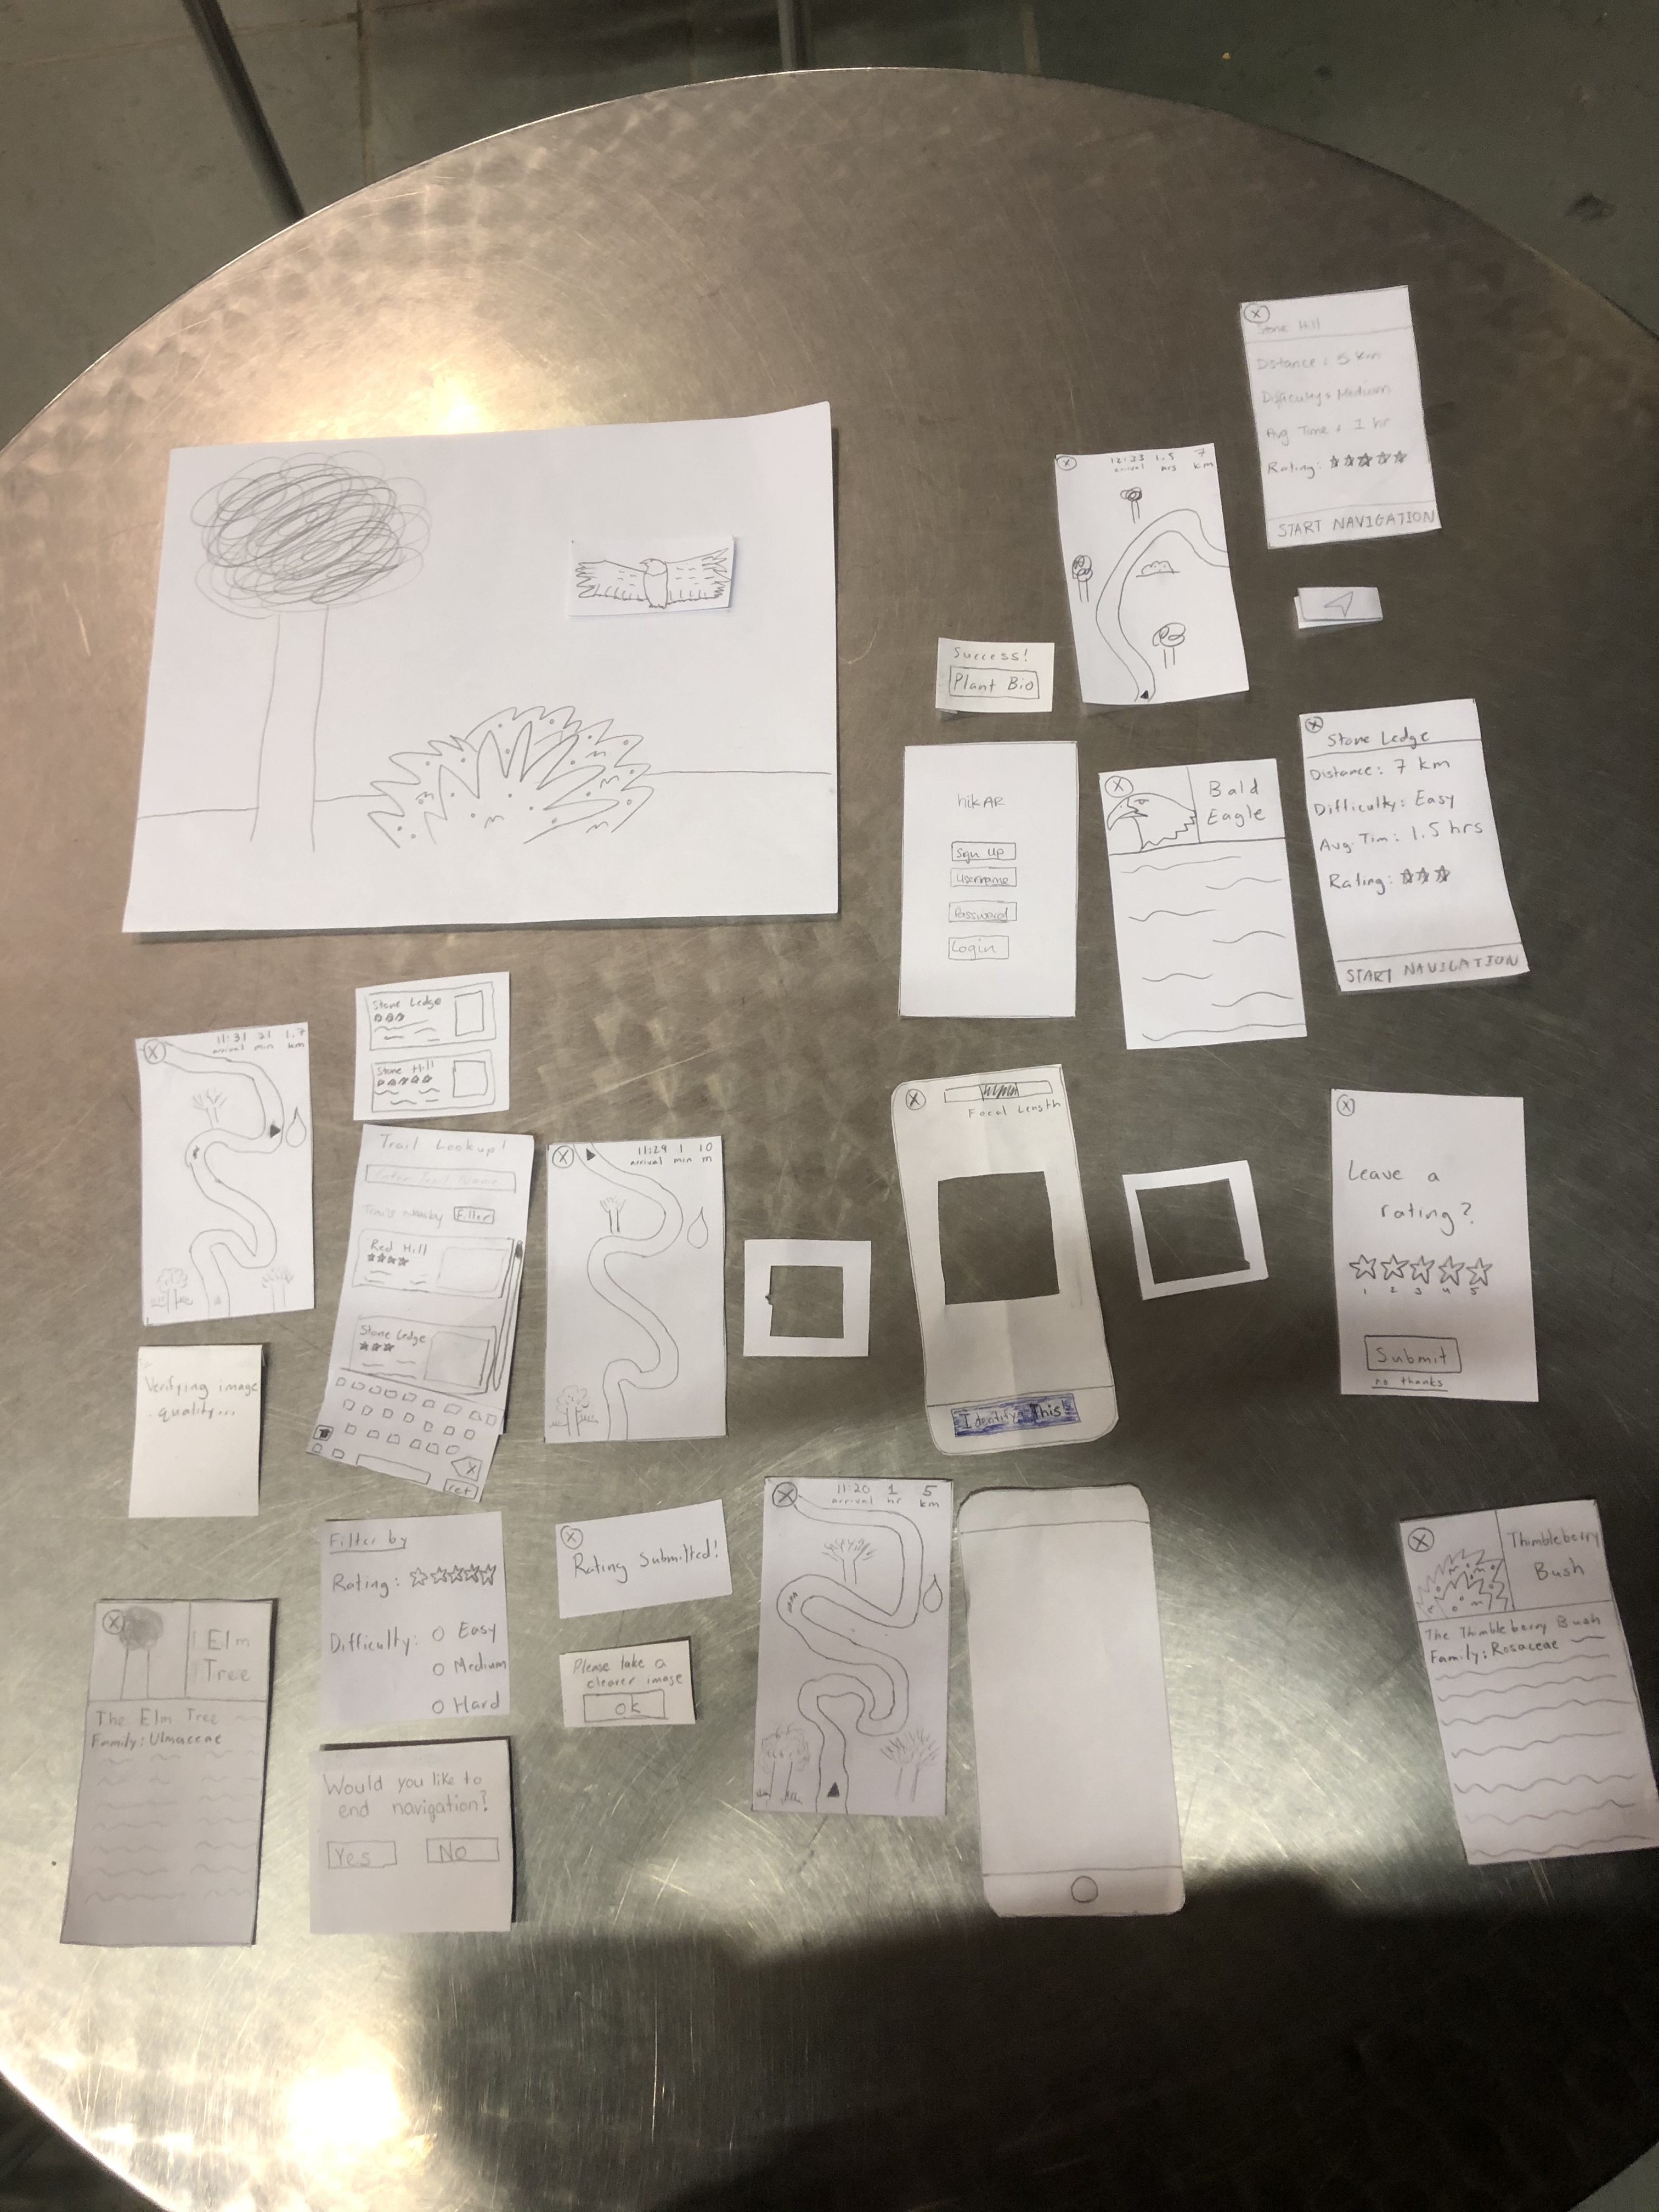 Overview of all the pieces of our paper prototype including the revisions